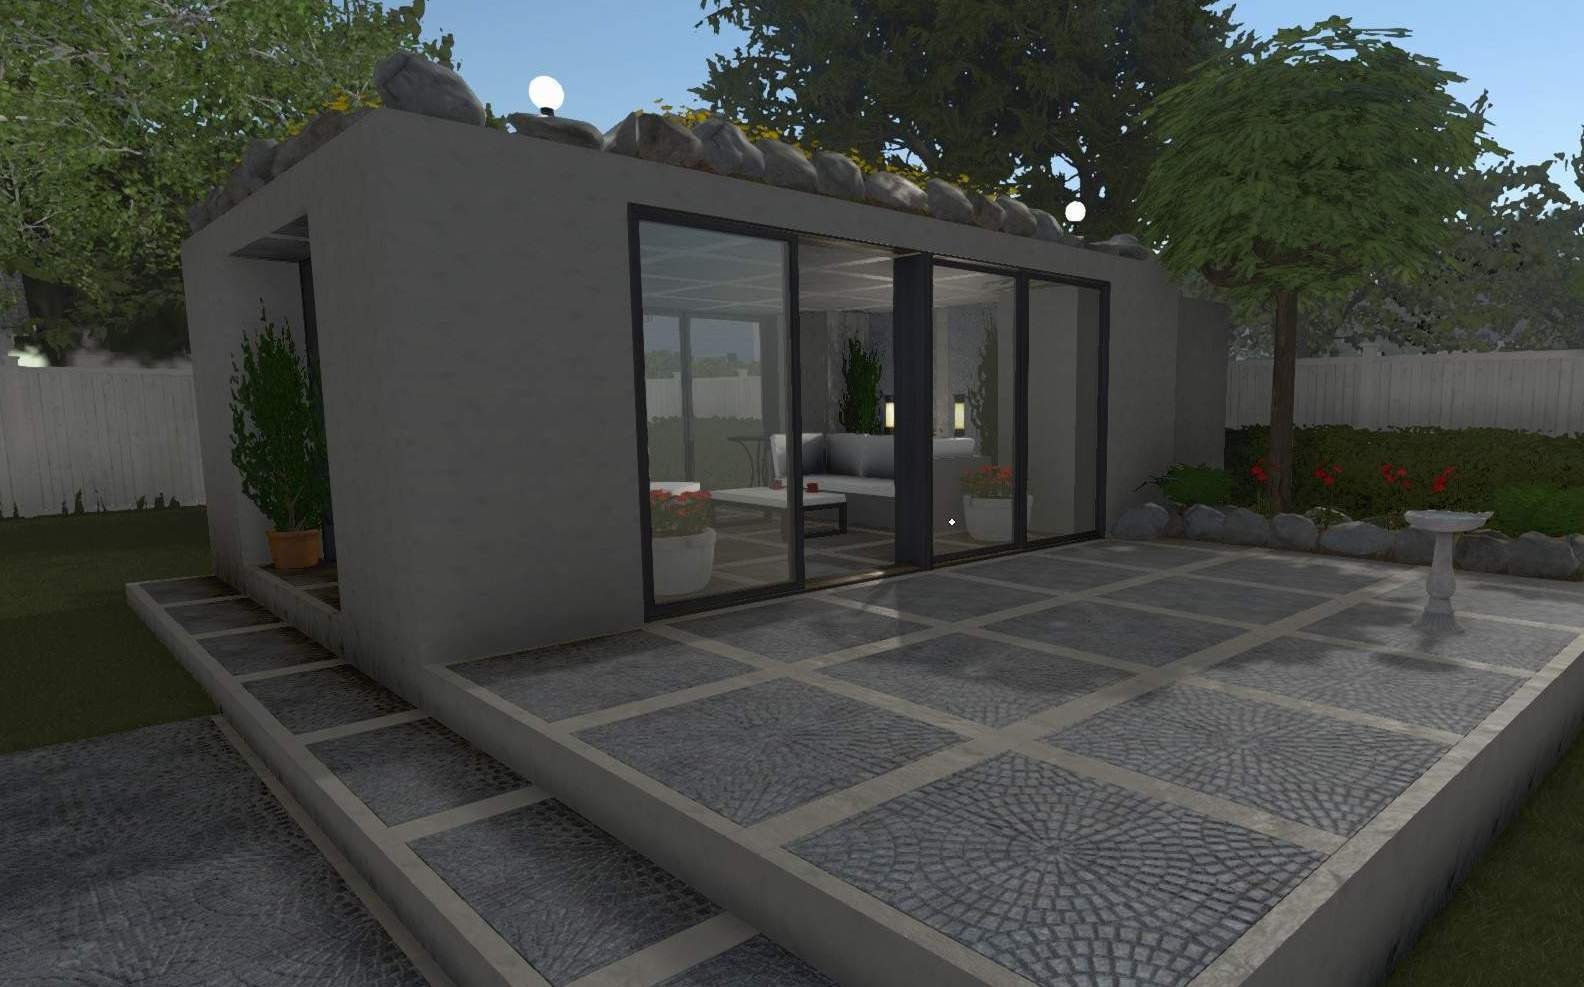 house flipper pc game guide